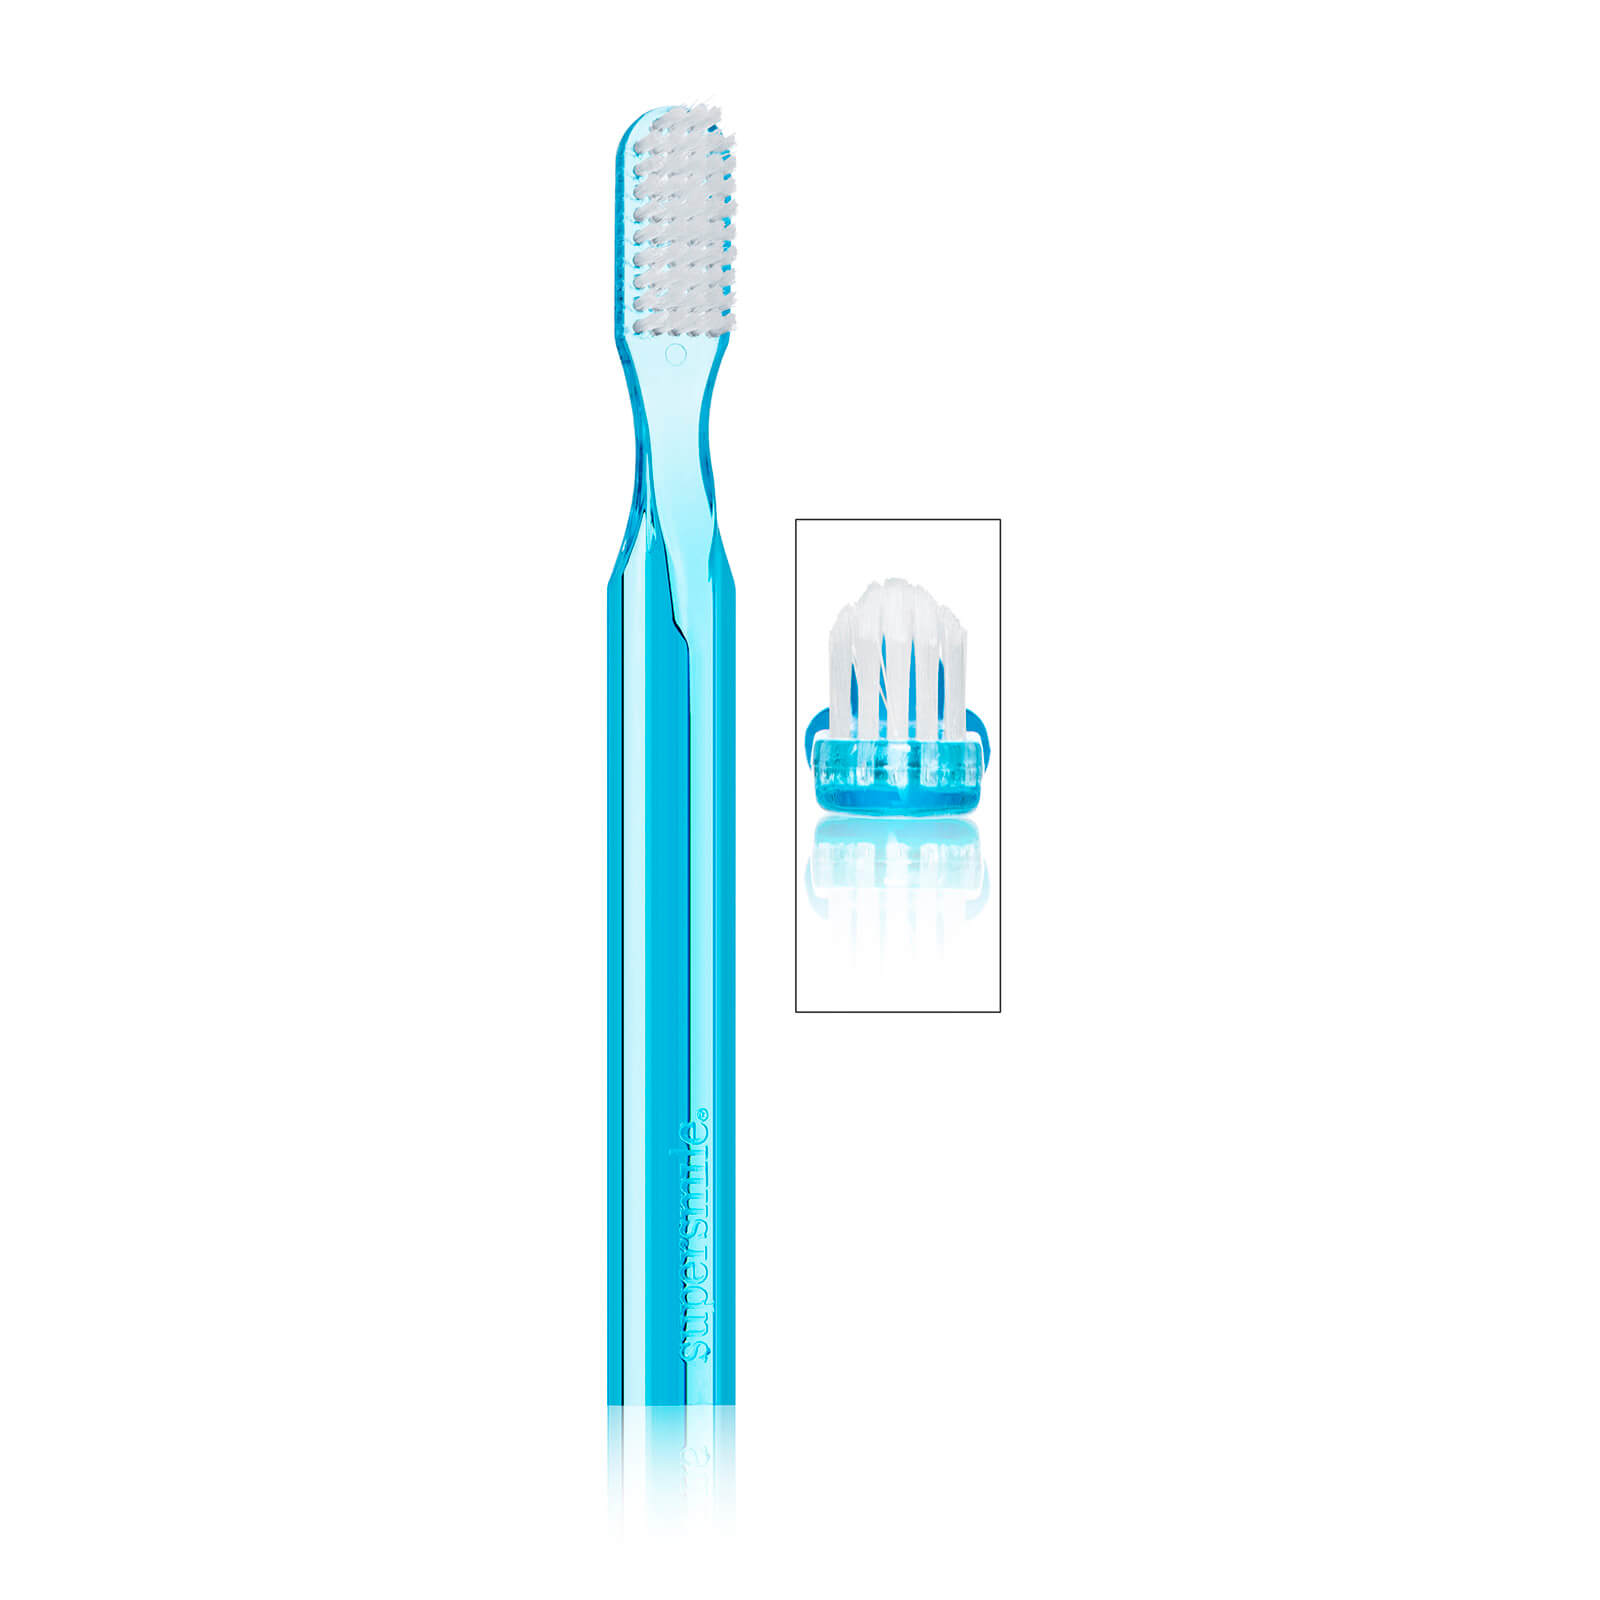 Supersmile 45 Degree Angled Toothbrush 1 piece - Blue